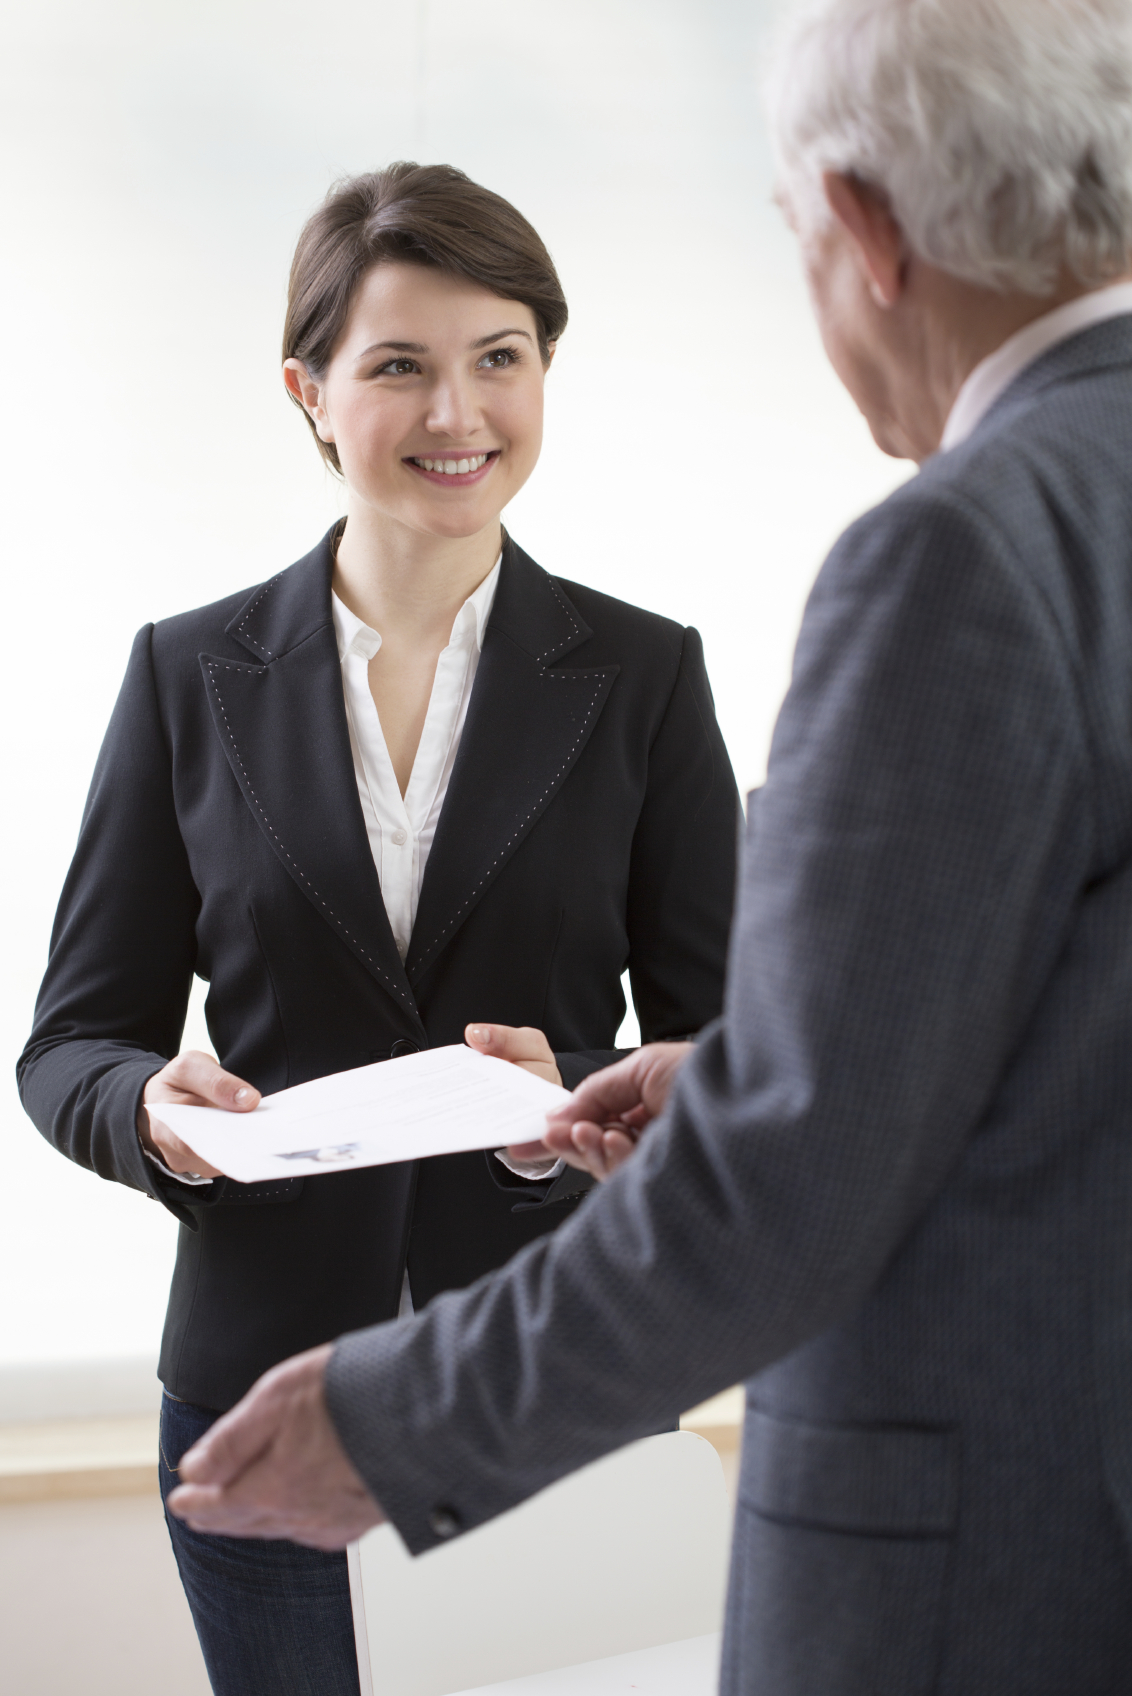 stock photo of a meeting between a businessman and businesswoman